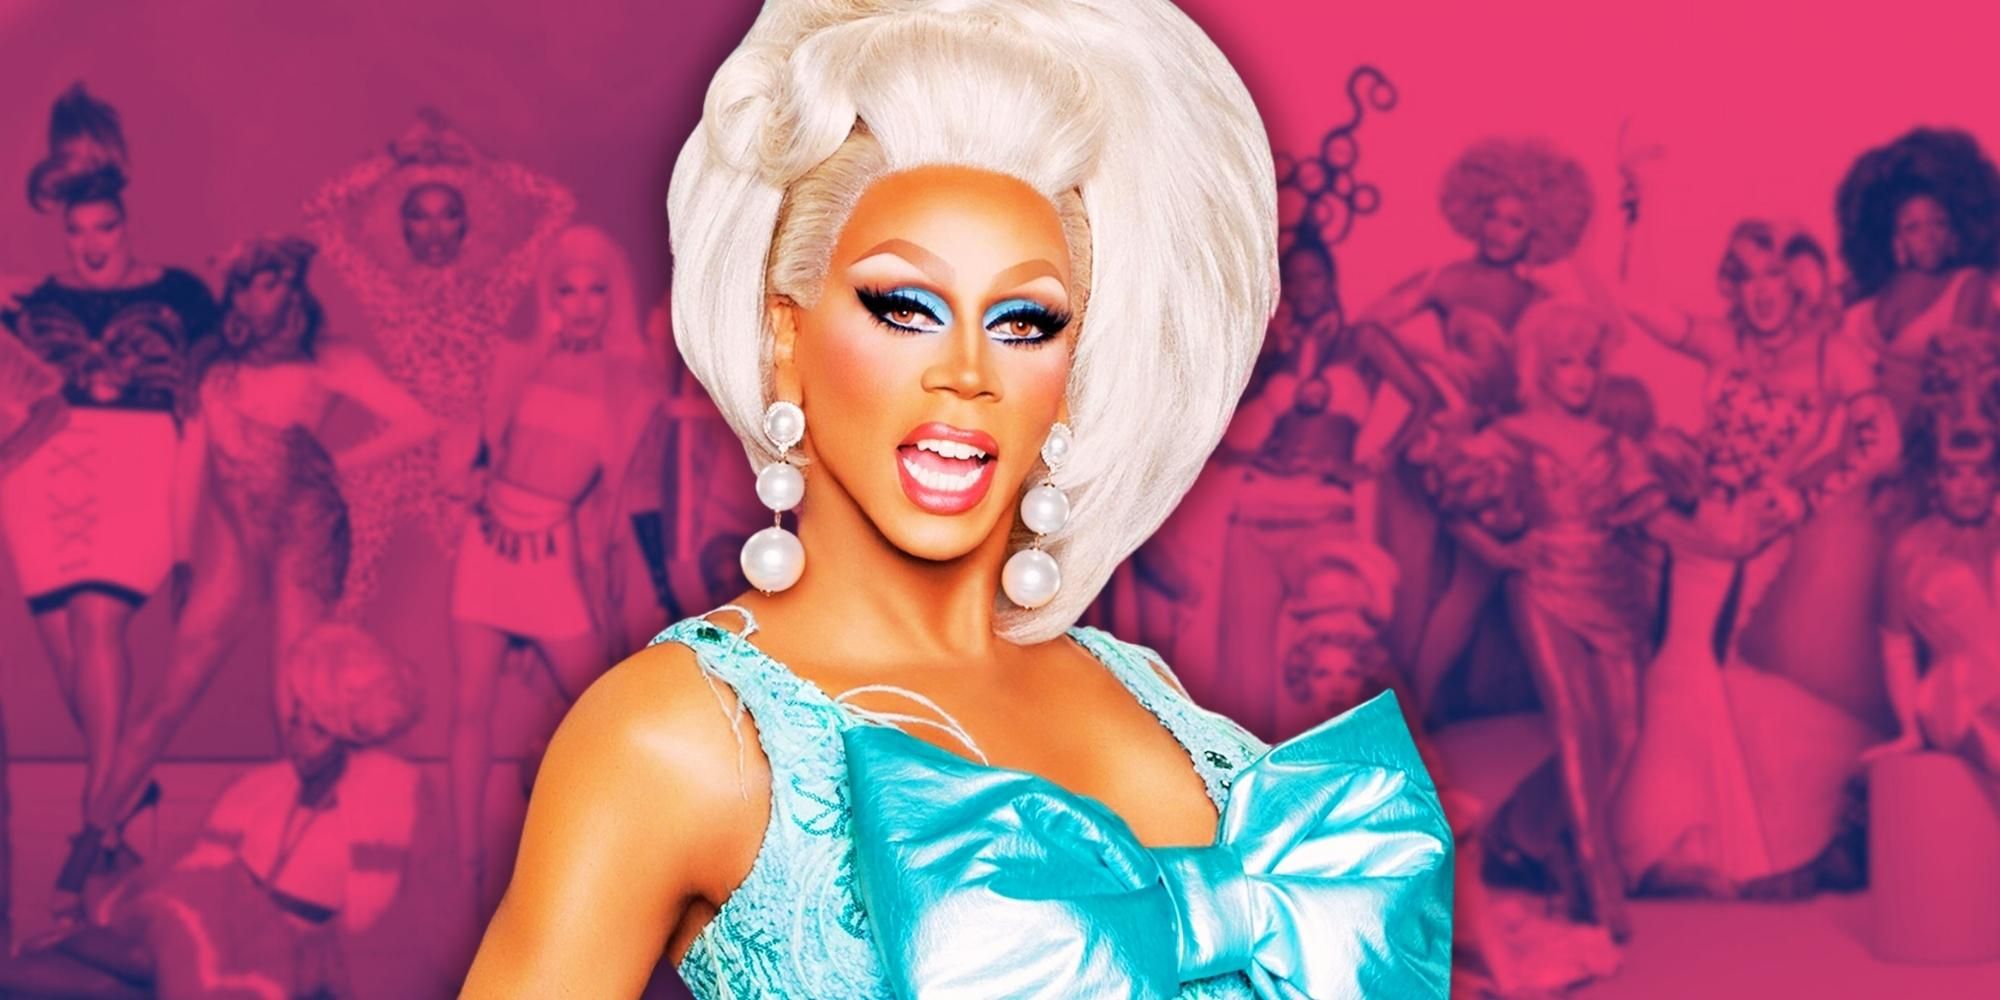 Image of Rupaul and a cast photo from Rupaul's drag race